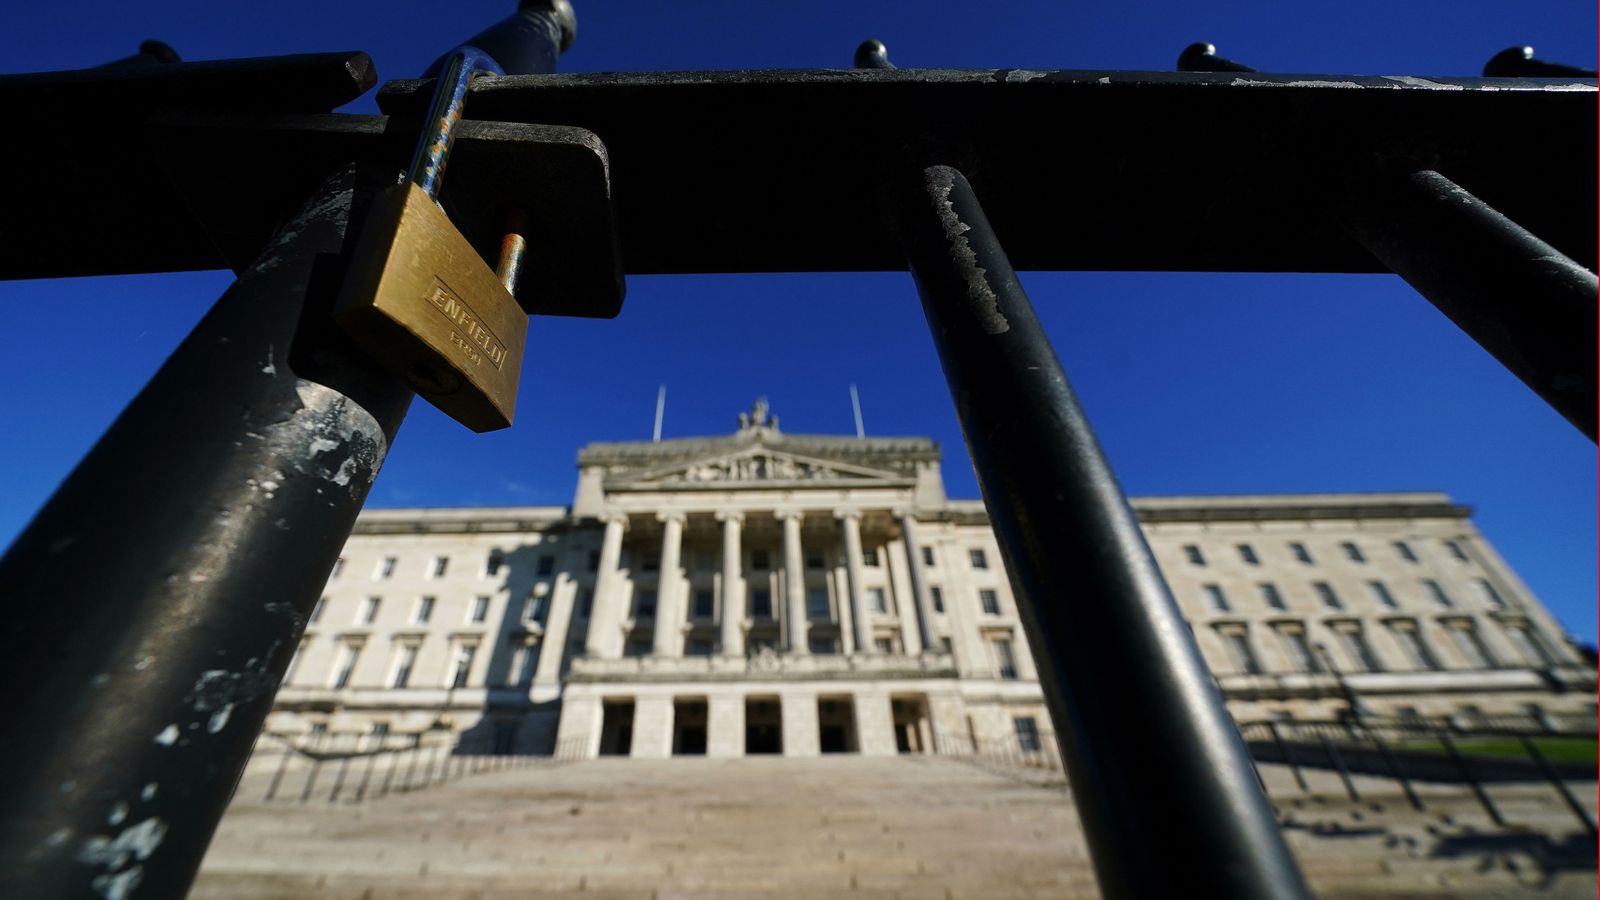 DUP leader: Another election will not break the power-sharing deadlock at Stormont